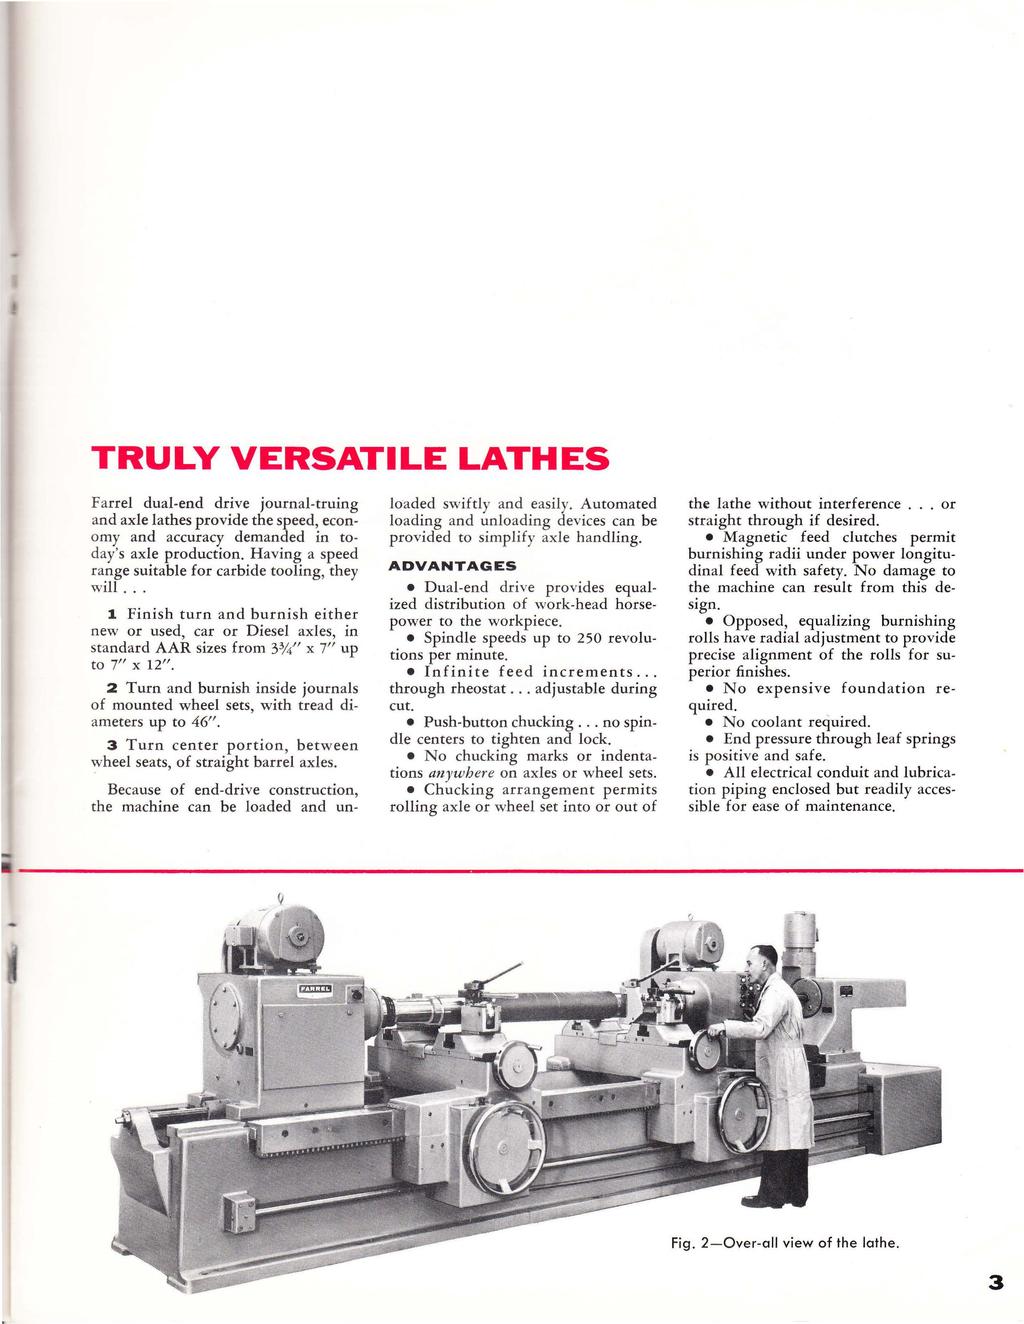 TRULY VERSATILE LATHES Farrel dual-end drive journal-truing and axle lathes provide the speed, economy and accuracy demanded in today's axle production.